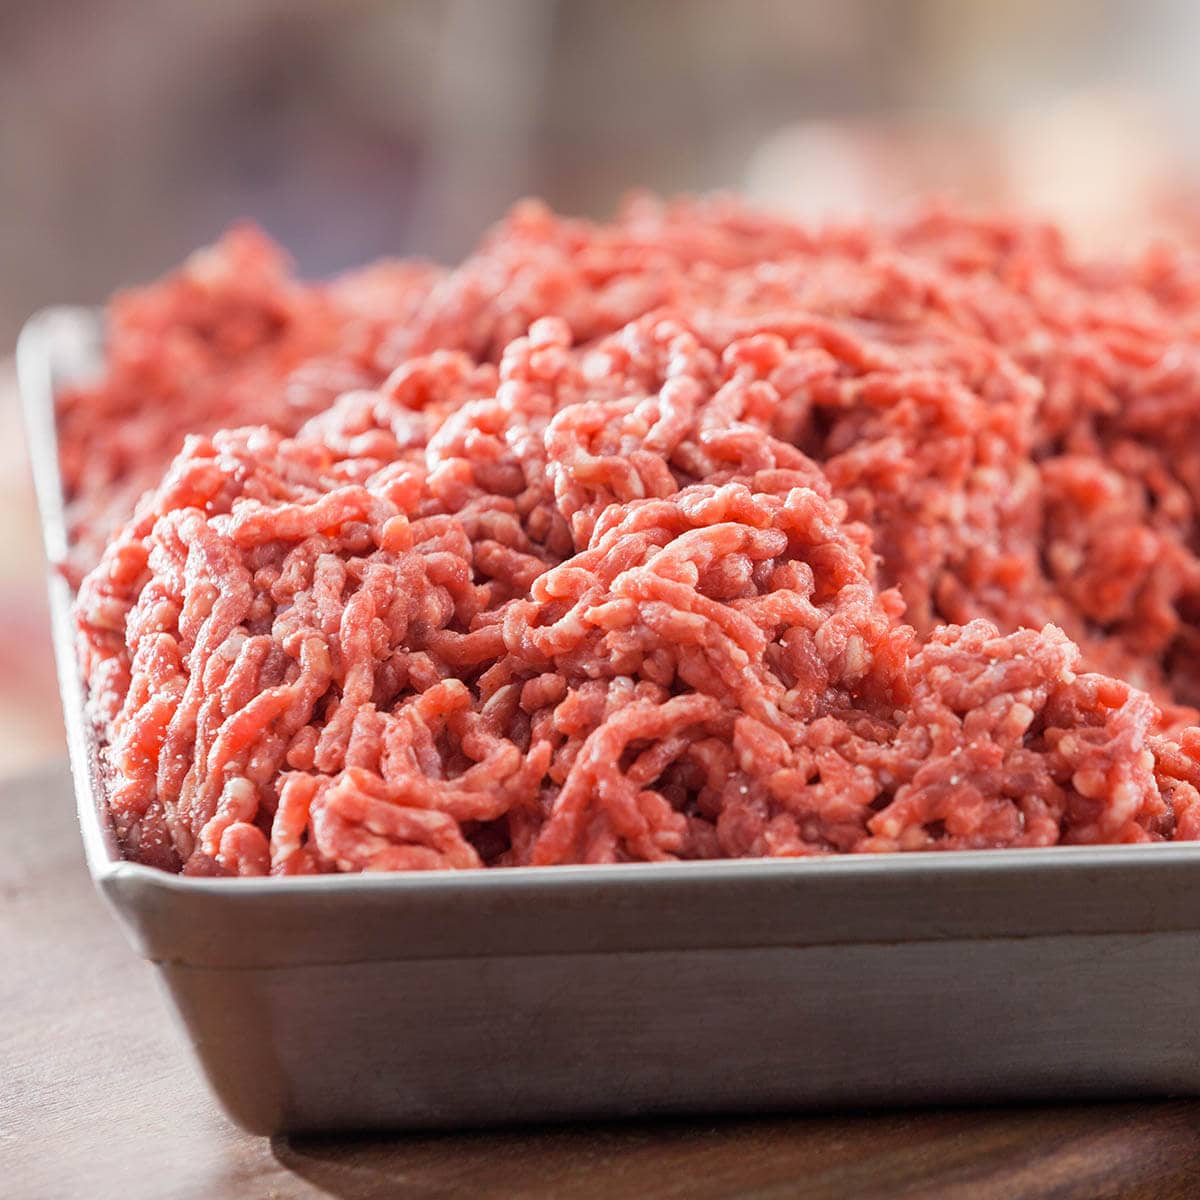 Ground beef is stored on a tray.